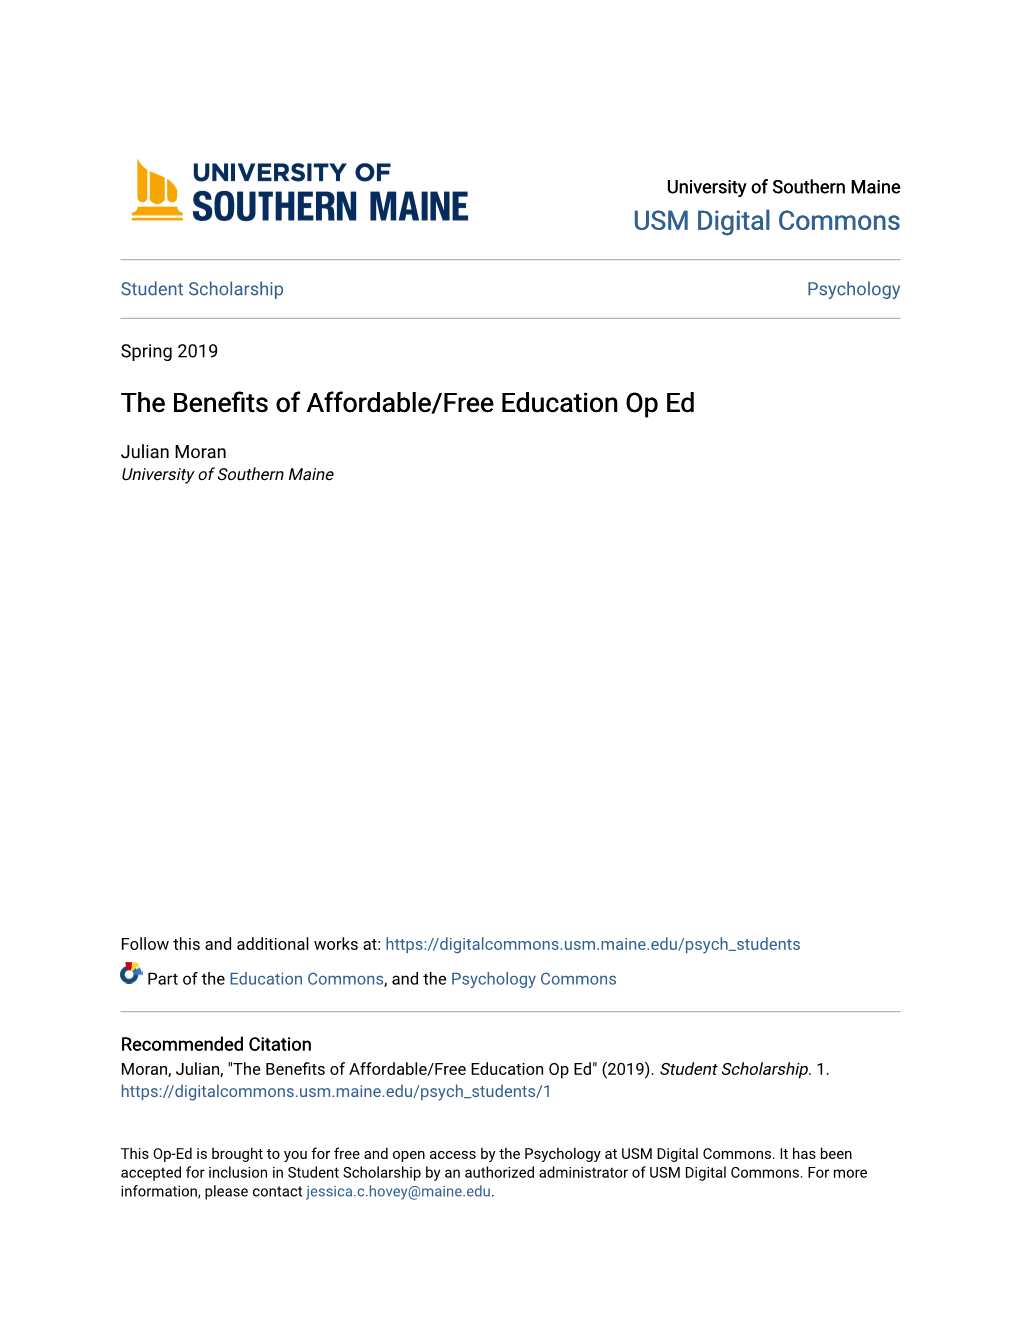 The Benefits of Affordable/Free Education Op Ed